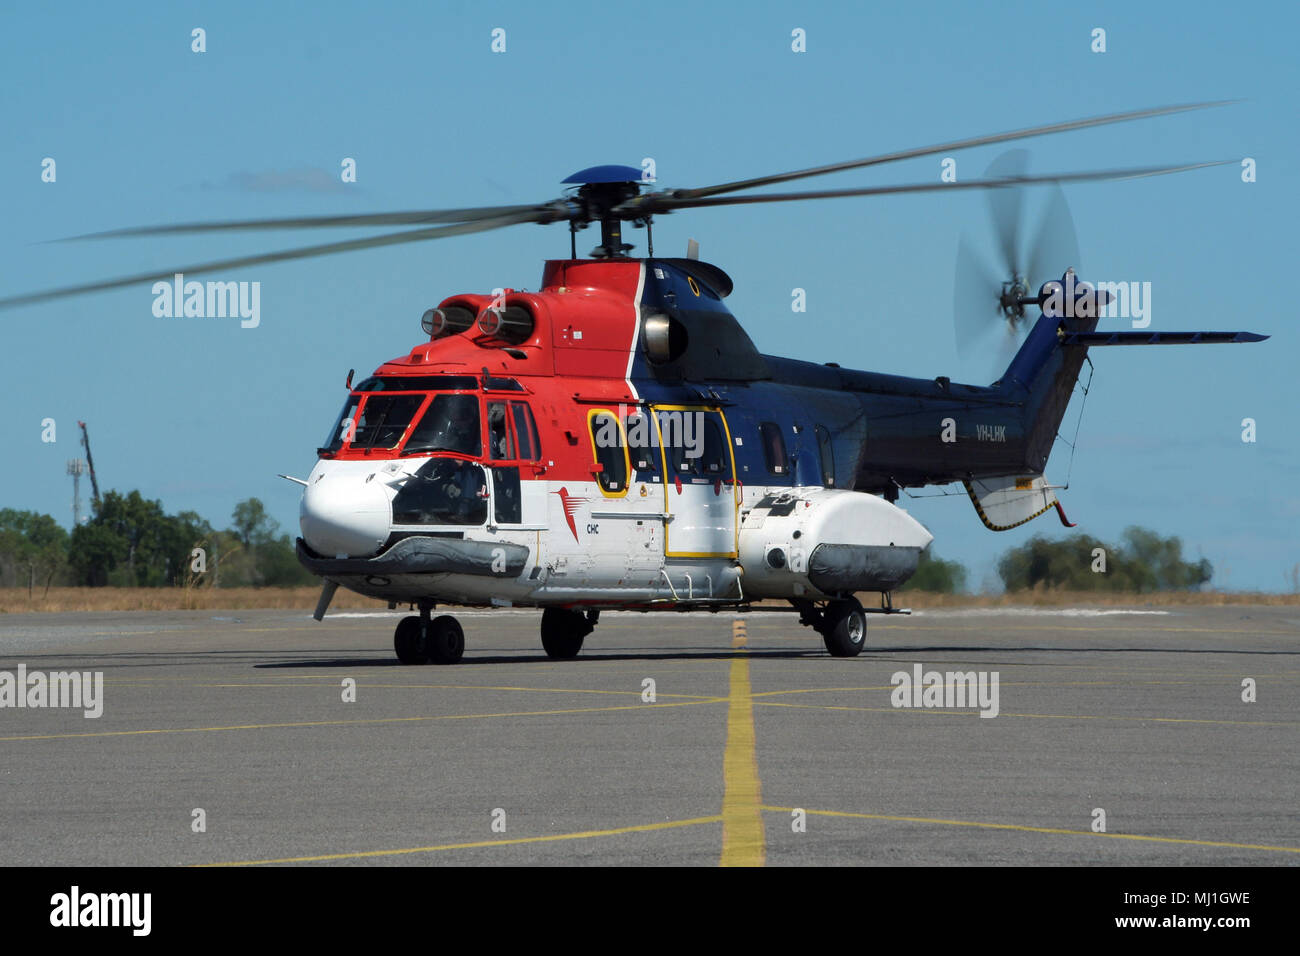 DARWIN, AUSTRALIA - AUG 2, 2006: Aerospatiale AS332L Super Puma helicopter from Canadian Helicopter Corporation (CHC) landing on Darwin Airport. Stock Photo